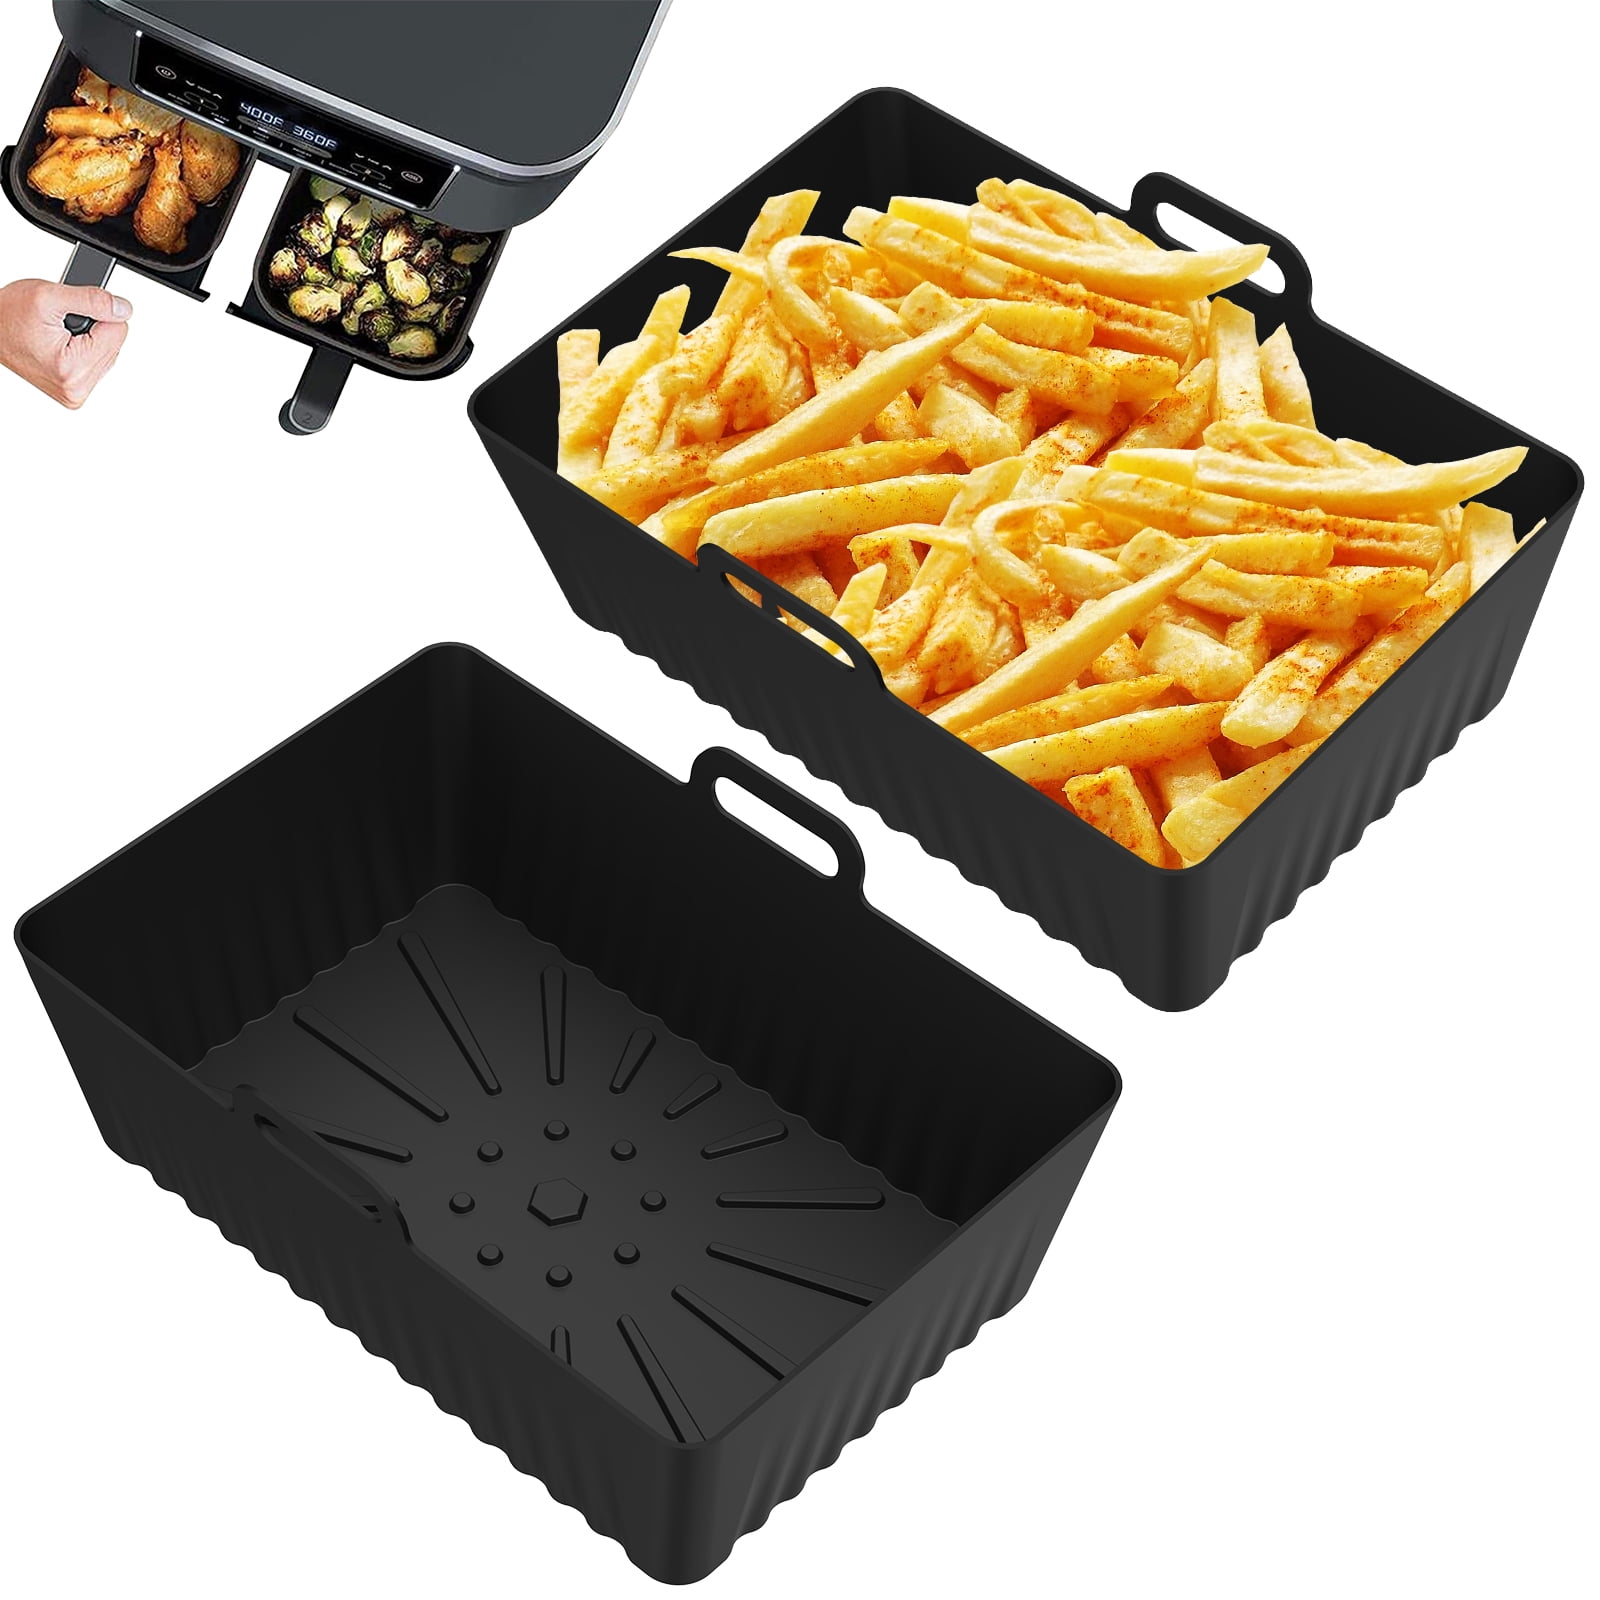 Jokapy 2Pcs Air Fryer Silicone Pot 7.5 inch Silicone Air Fryer Liner Air  Fryer Basket No-Stick Air Fryer Pan for Air Fryer Oven Microwave